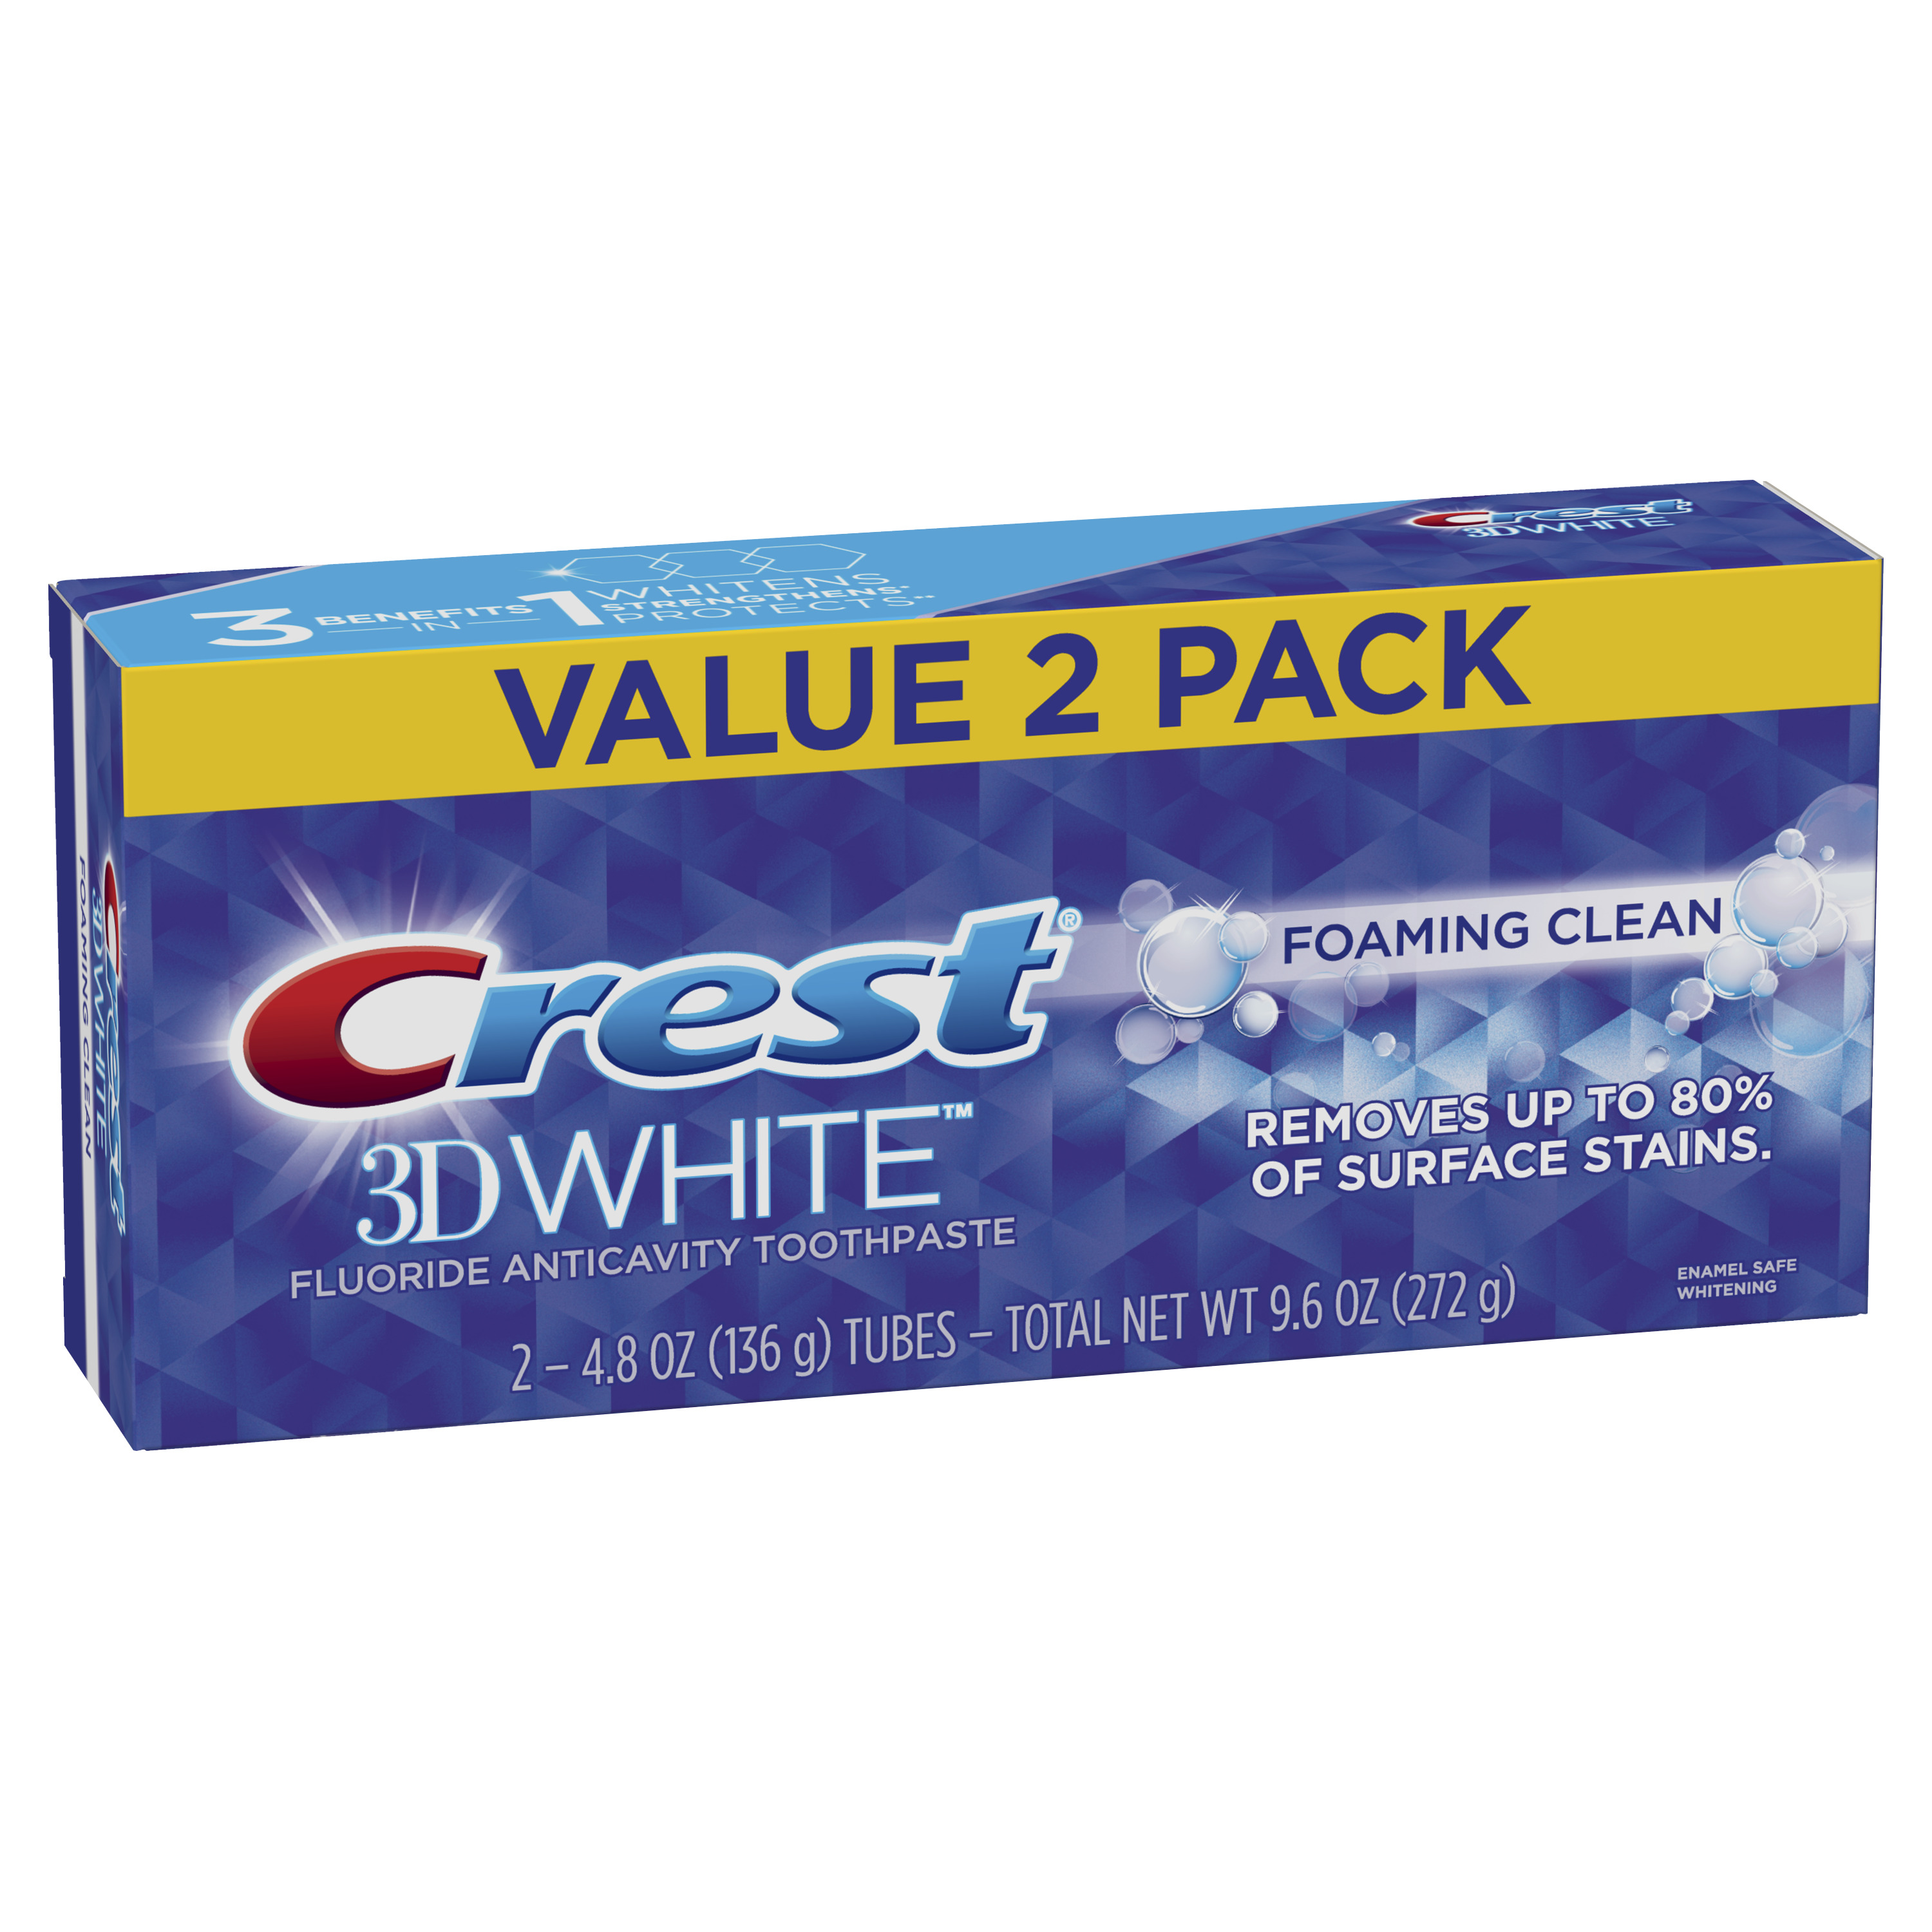 Crest 3D White Foaming Clean Whitening Toothpaste, 4.8 oz, Pack of 2 - image 4 of 9